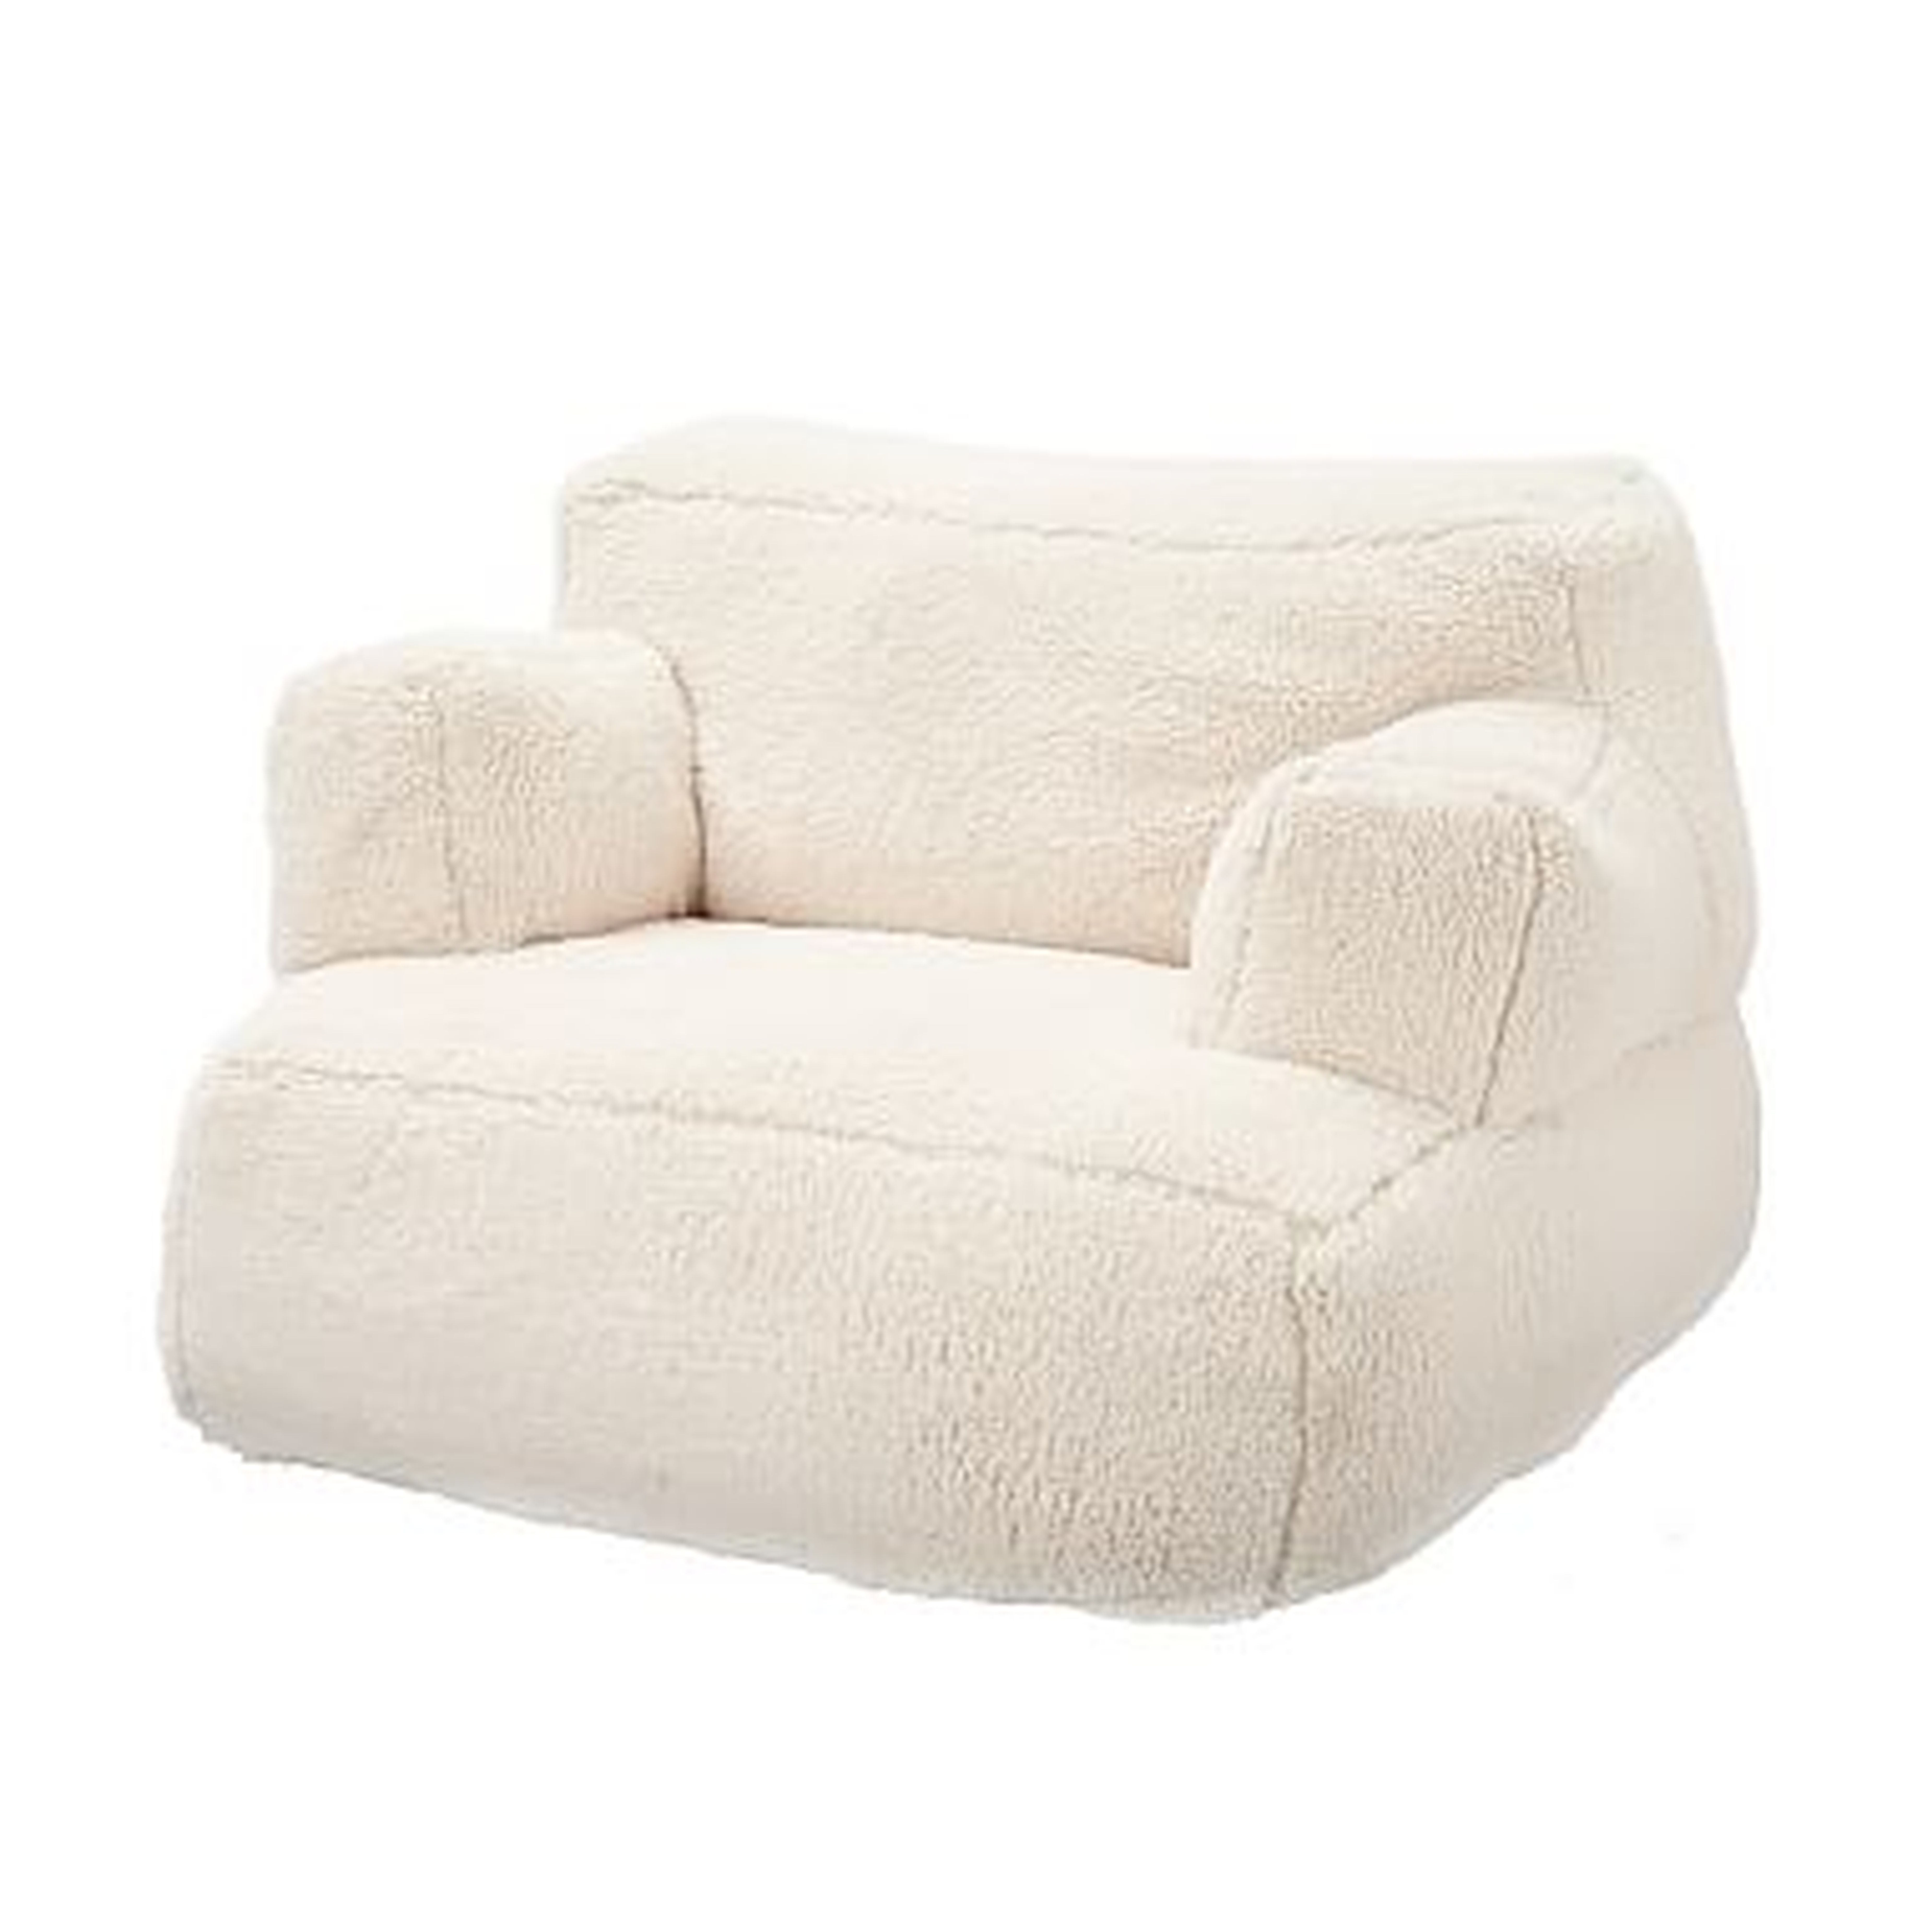 Sherpa Eco Lounger, Large - Pottery Barn Teen